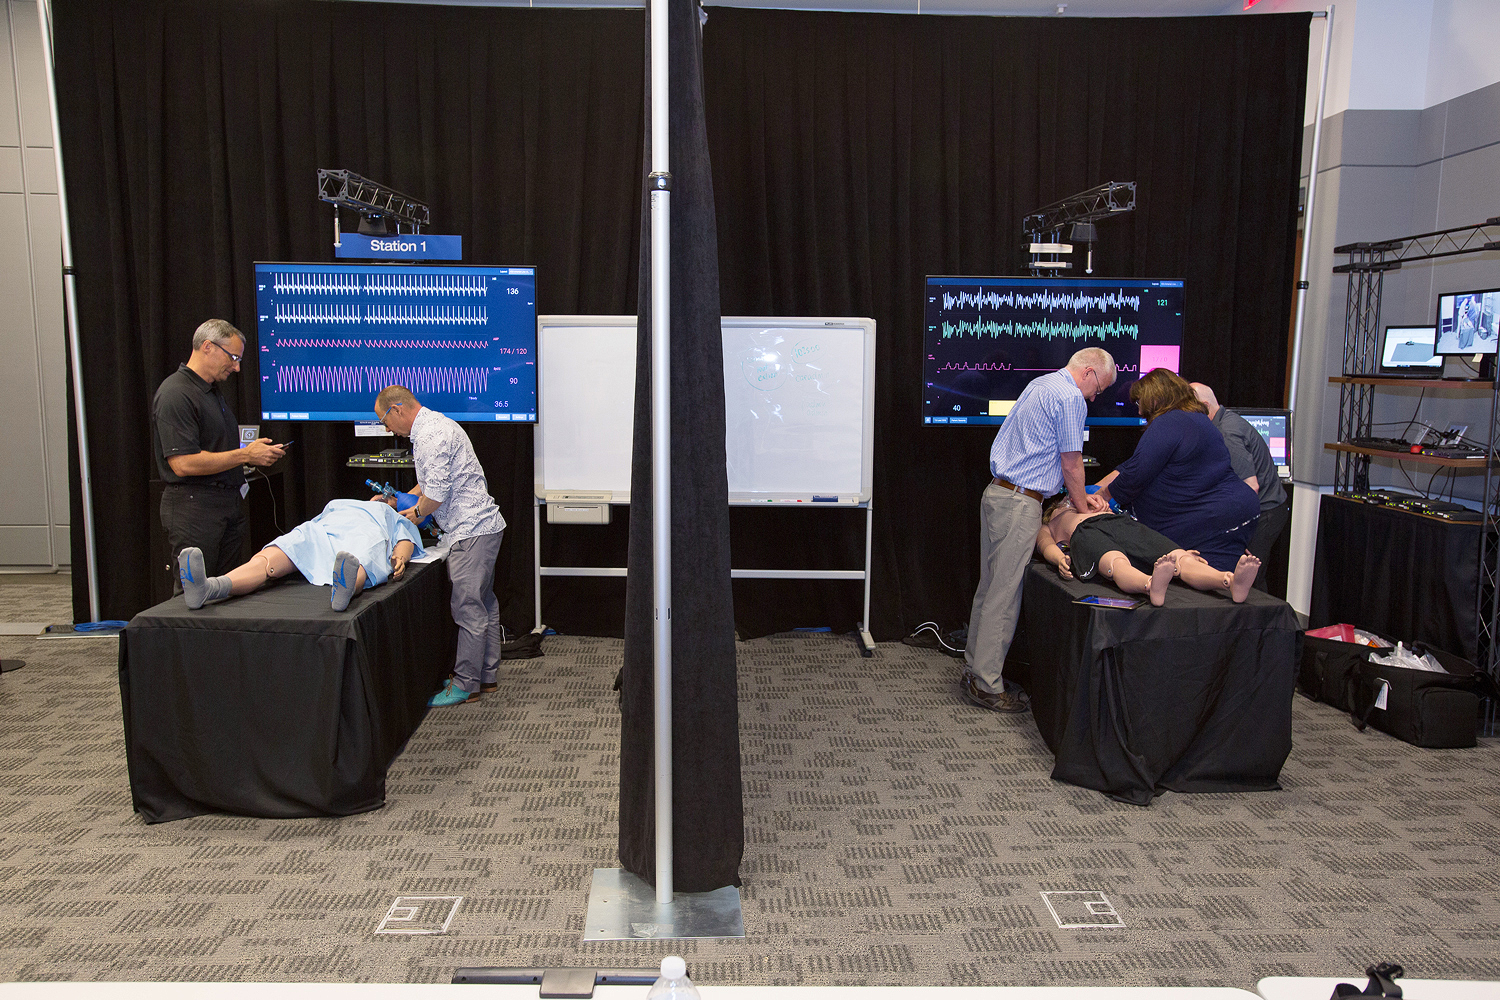 Proof of concept Simulator Station 1 is on the left and Station 2 is on the right. Sessions were shared with the overflow and debriefing rooms over the Extron NAV Pro AVoIP system.